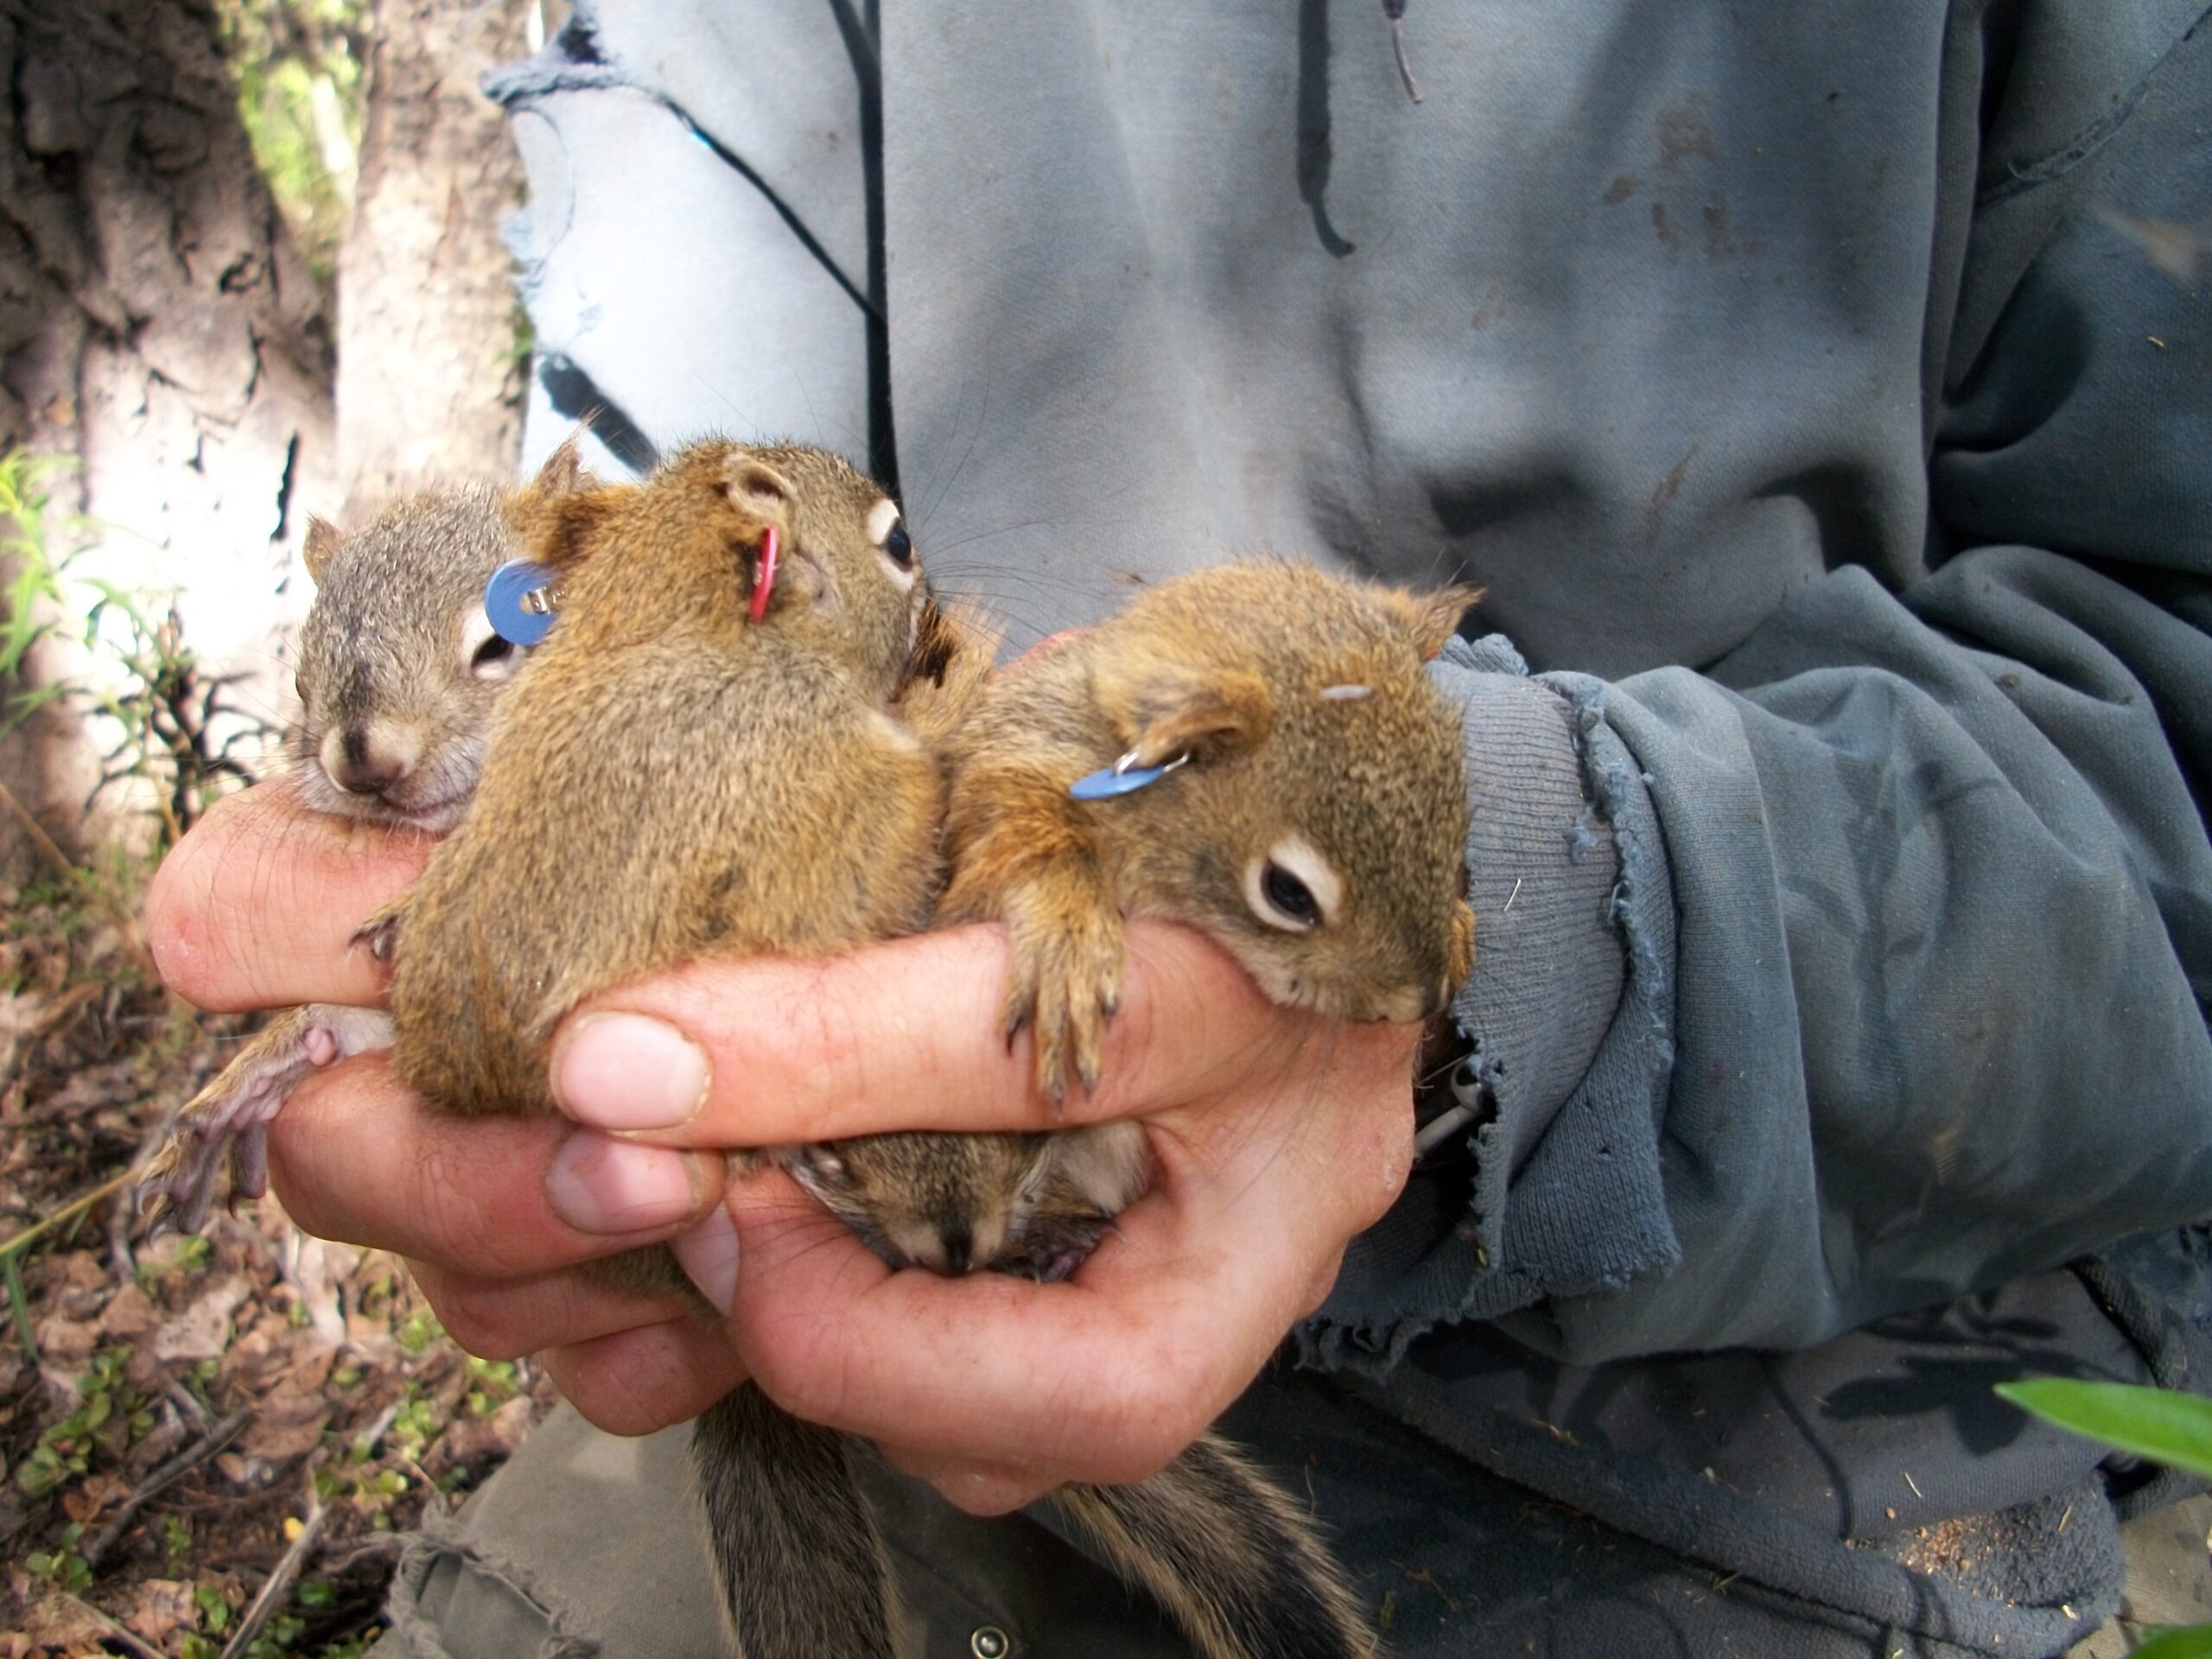 Baby squirrels are less likely to die if they’re born early